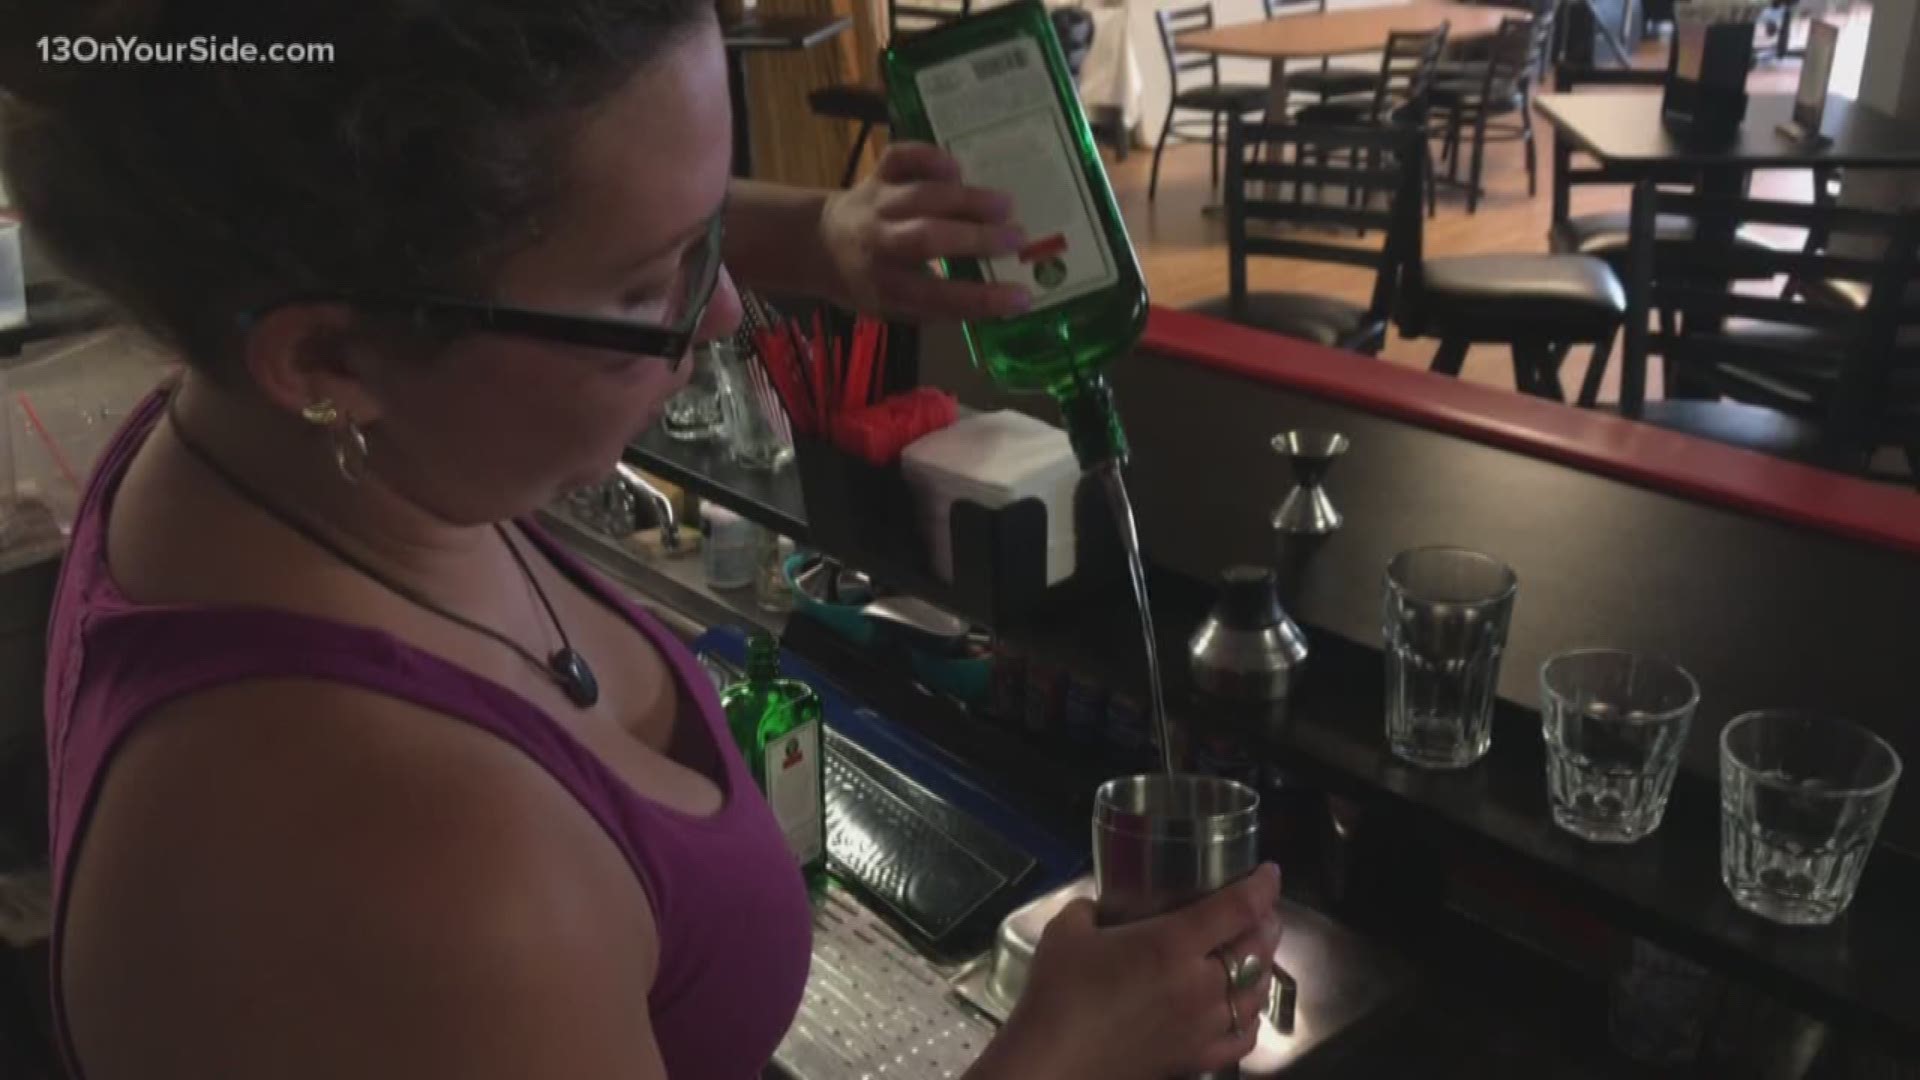 Each year Grand Rapids' American Legion Post 459 -- and its American Auxiliary Unit -- hosts a bar tending fundraiser to benefit men and women who have served our country, and this year is no different.